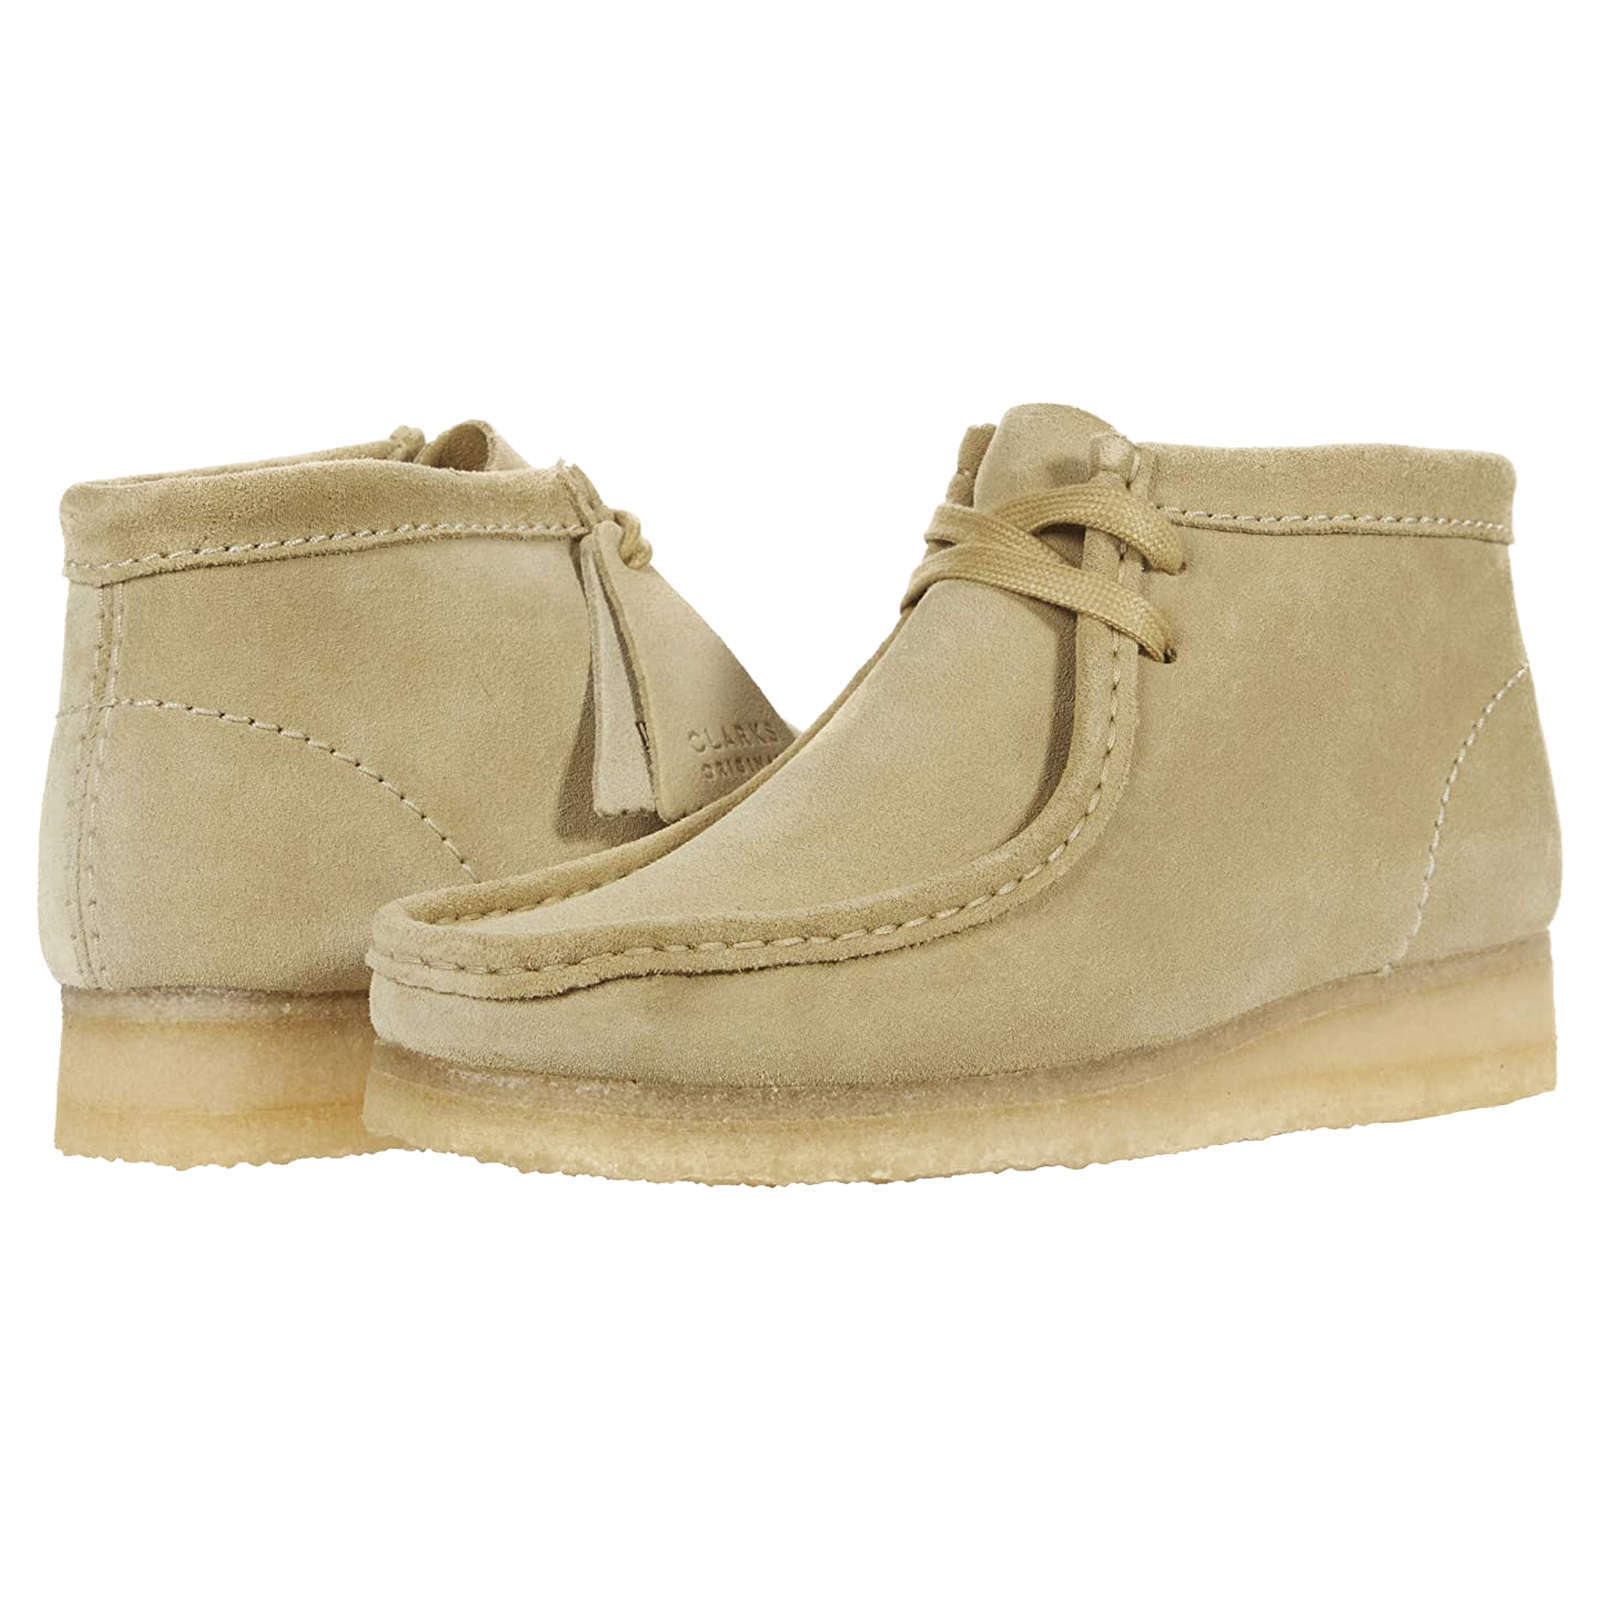 Clarks Originals Wallabee Suede Leather Women's Boots#color_maple